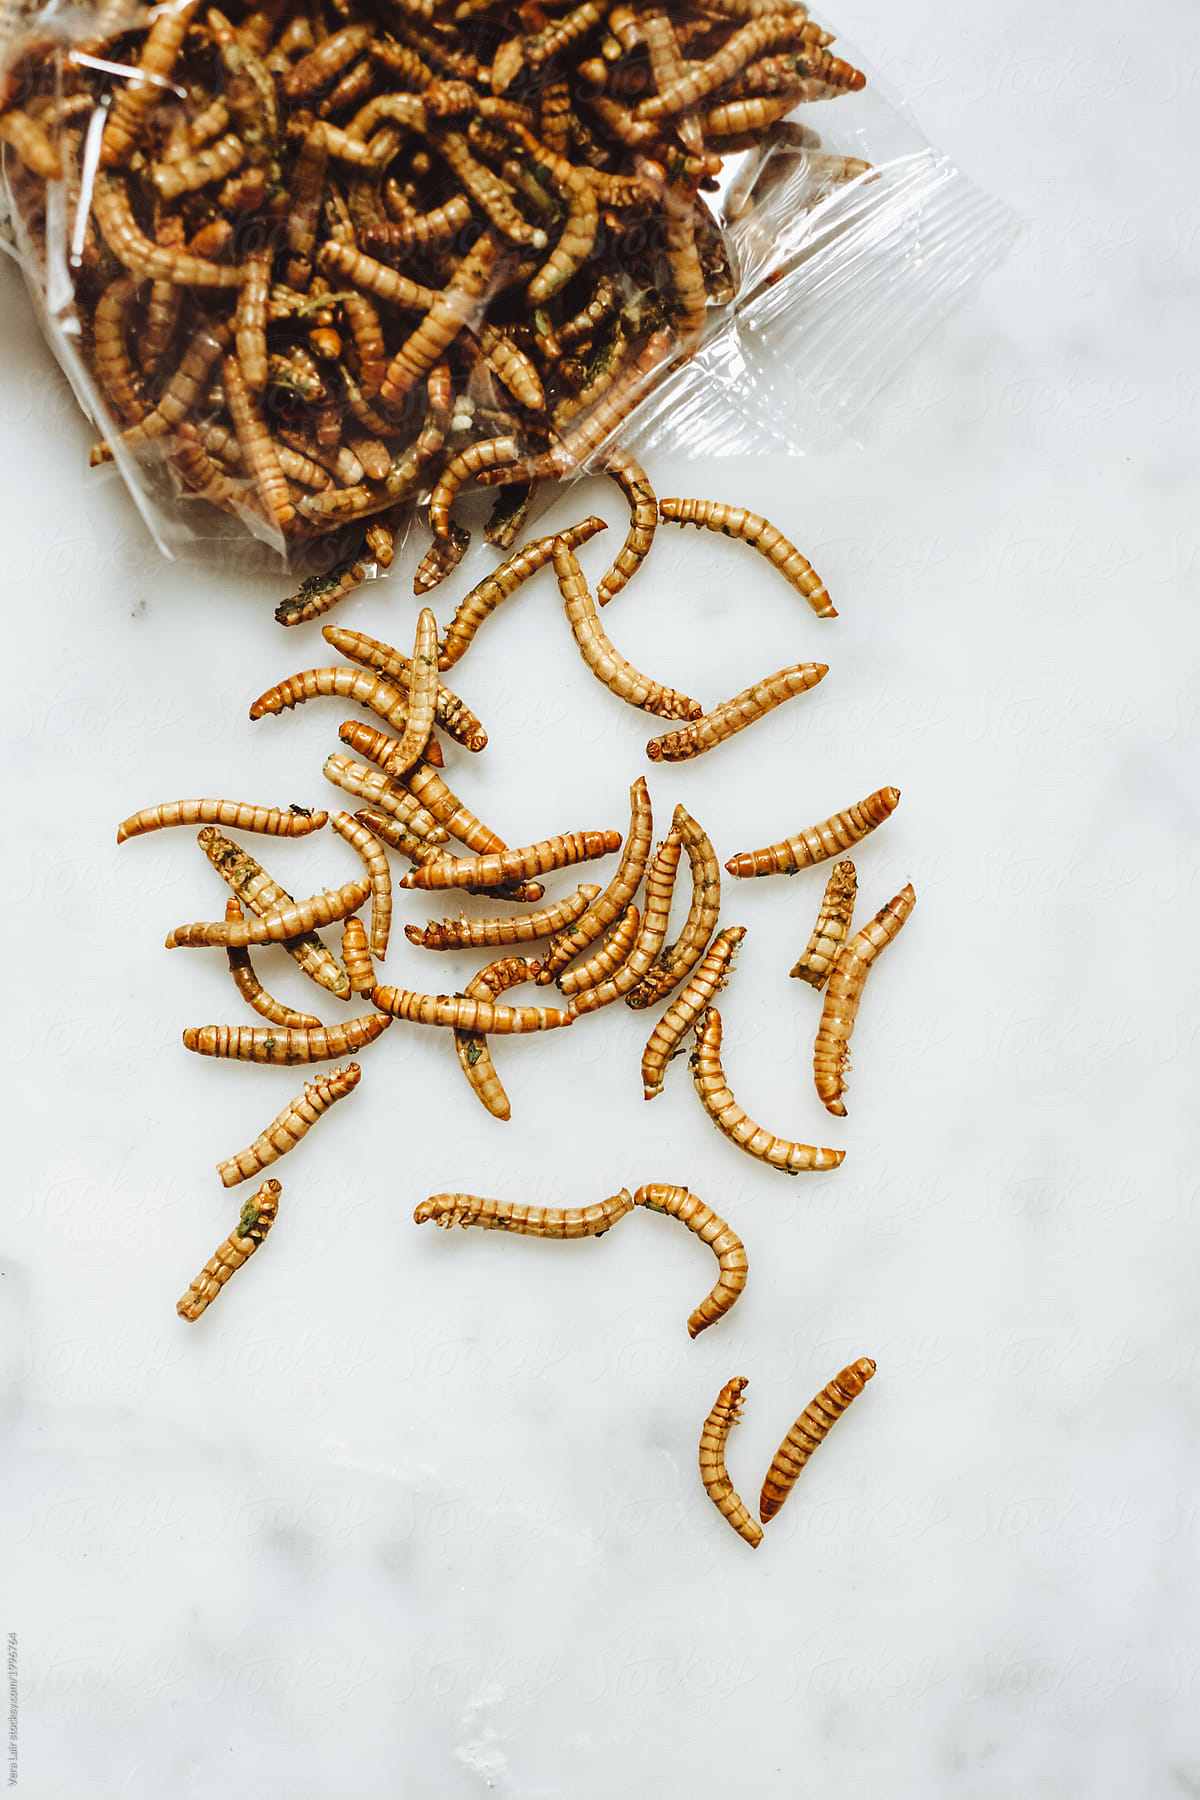 Close up of dried molitor worms